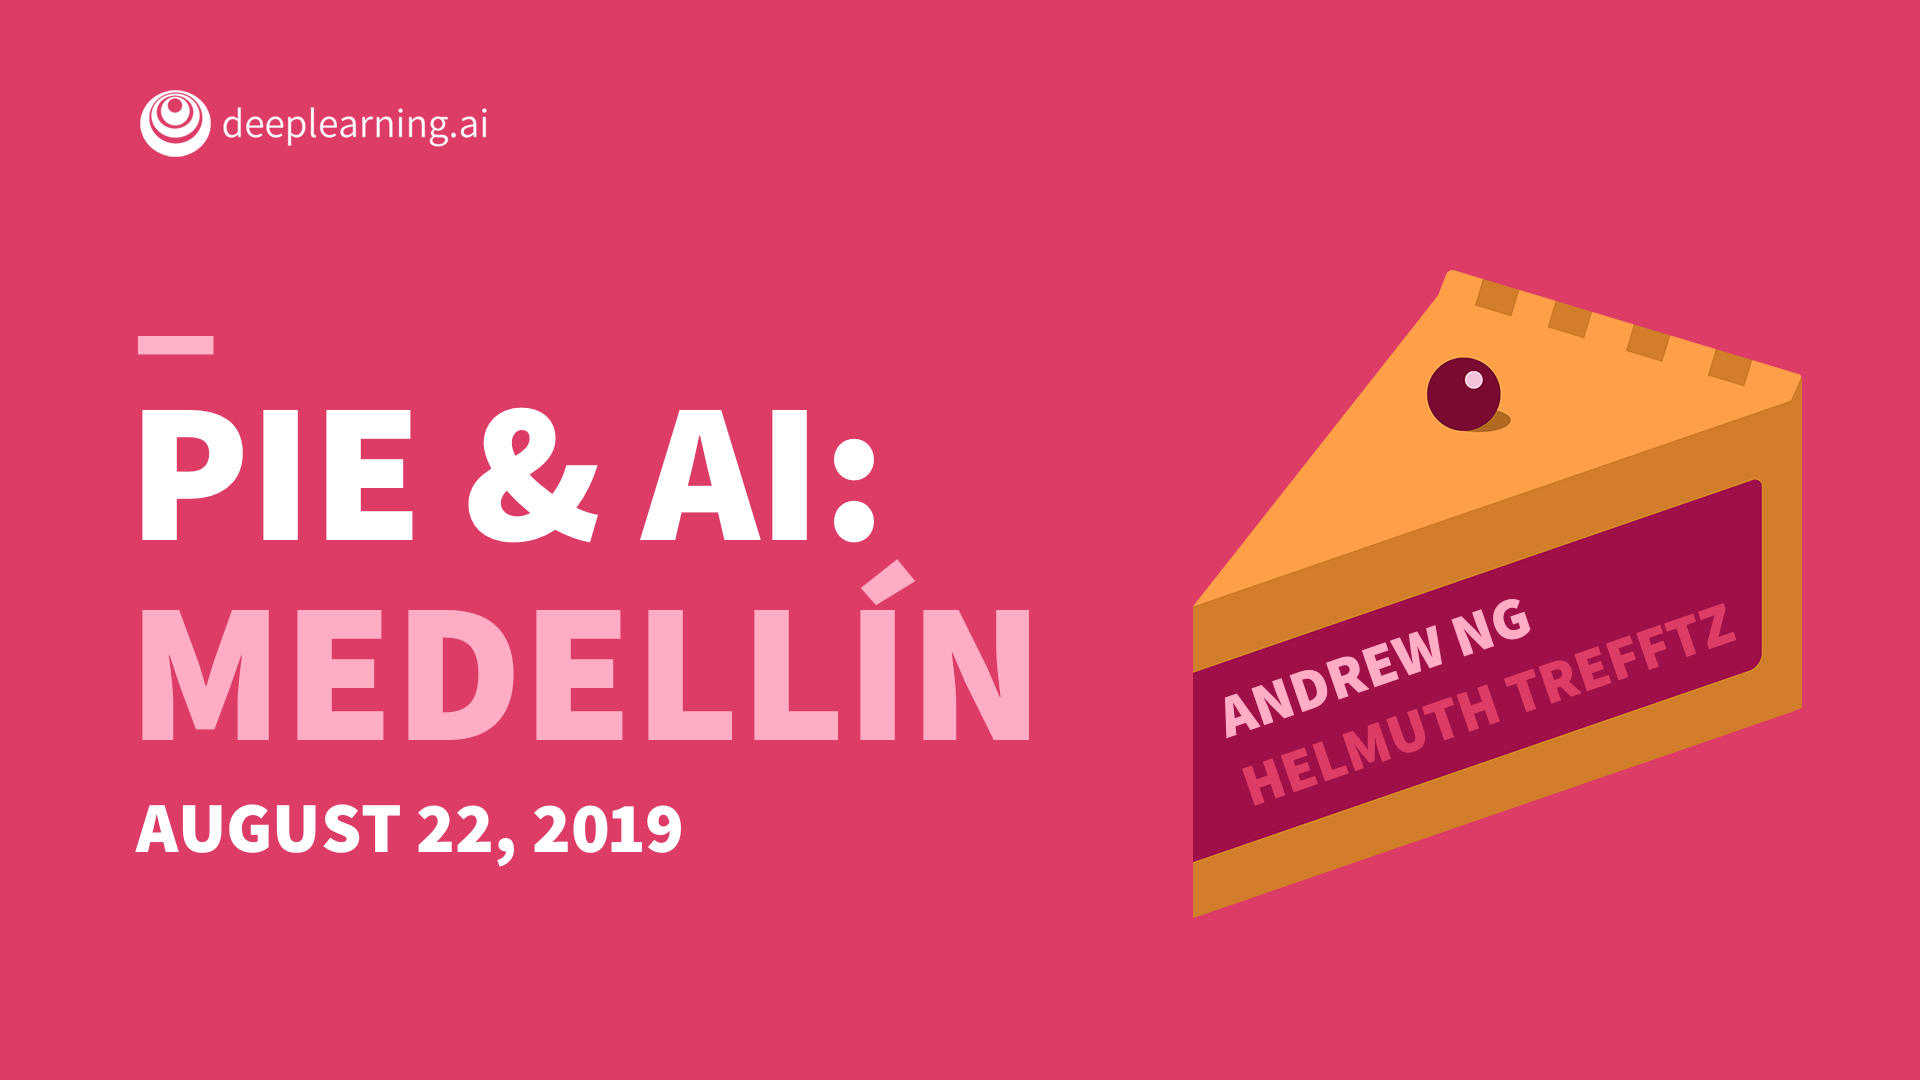 Pie & AI Medellín: A Conversation with Andrew Ng and Helmuth Trefftz